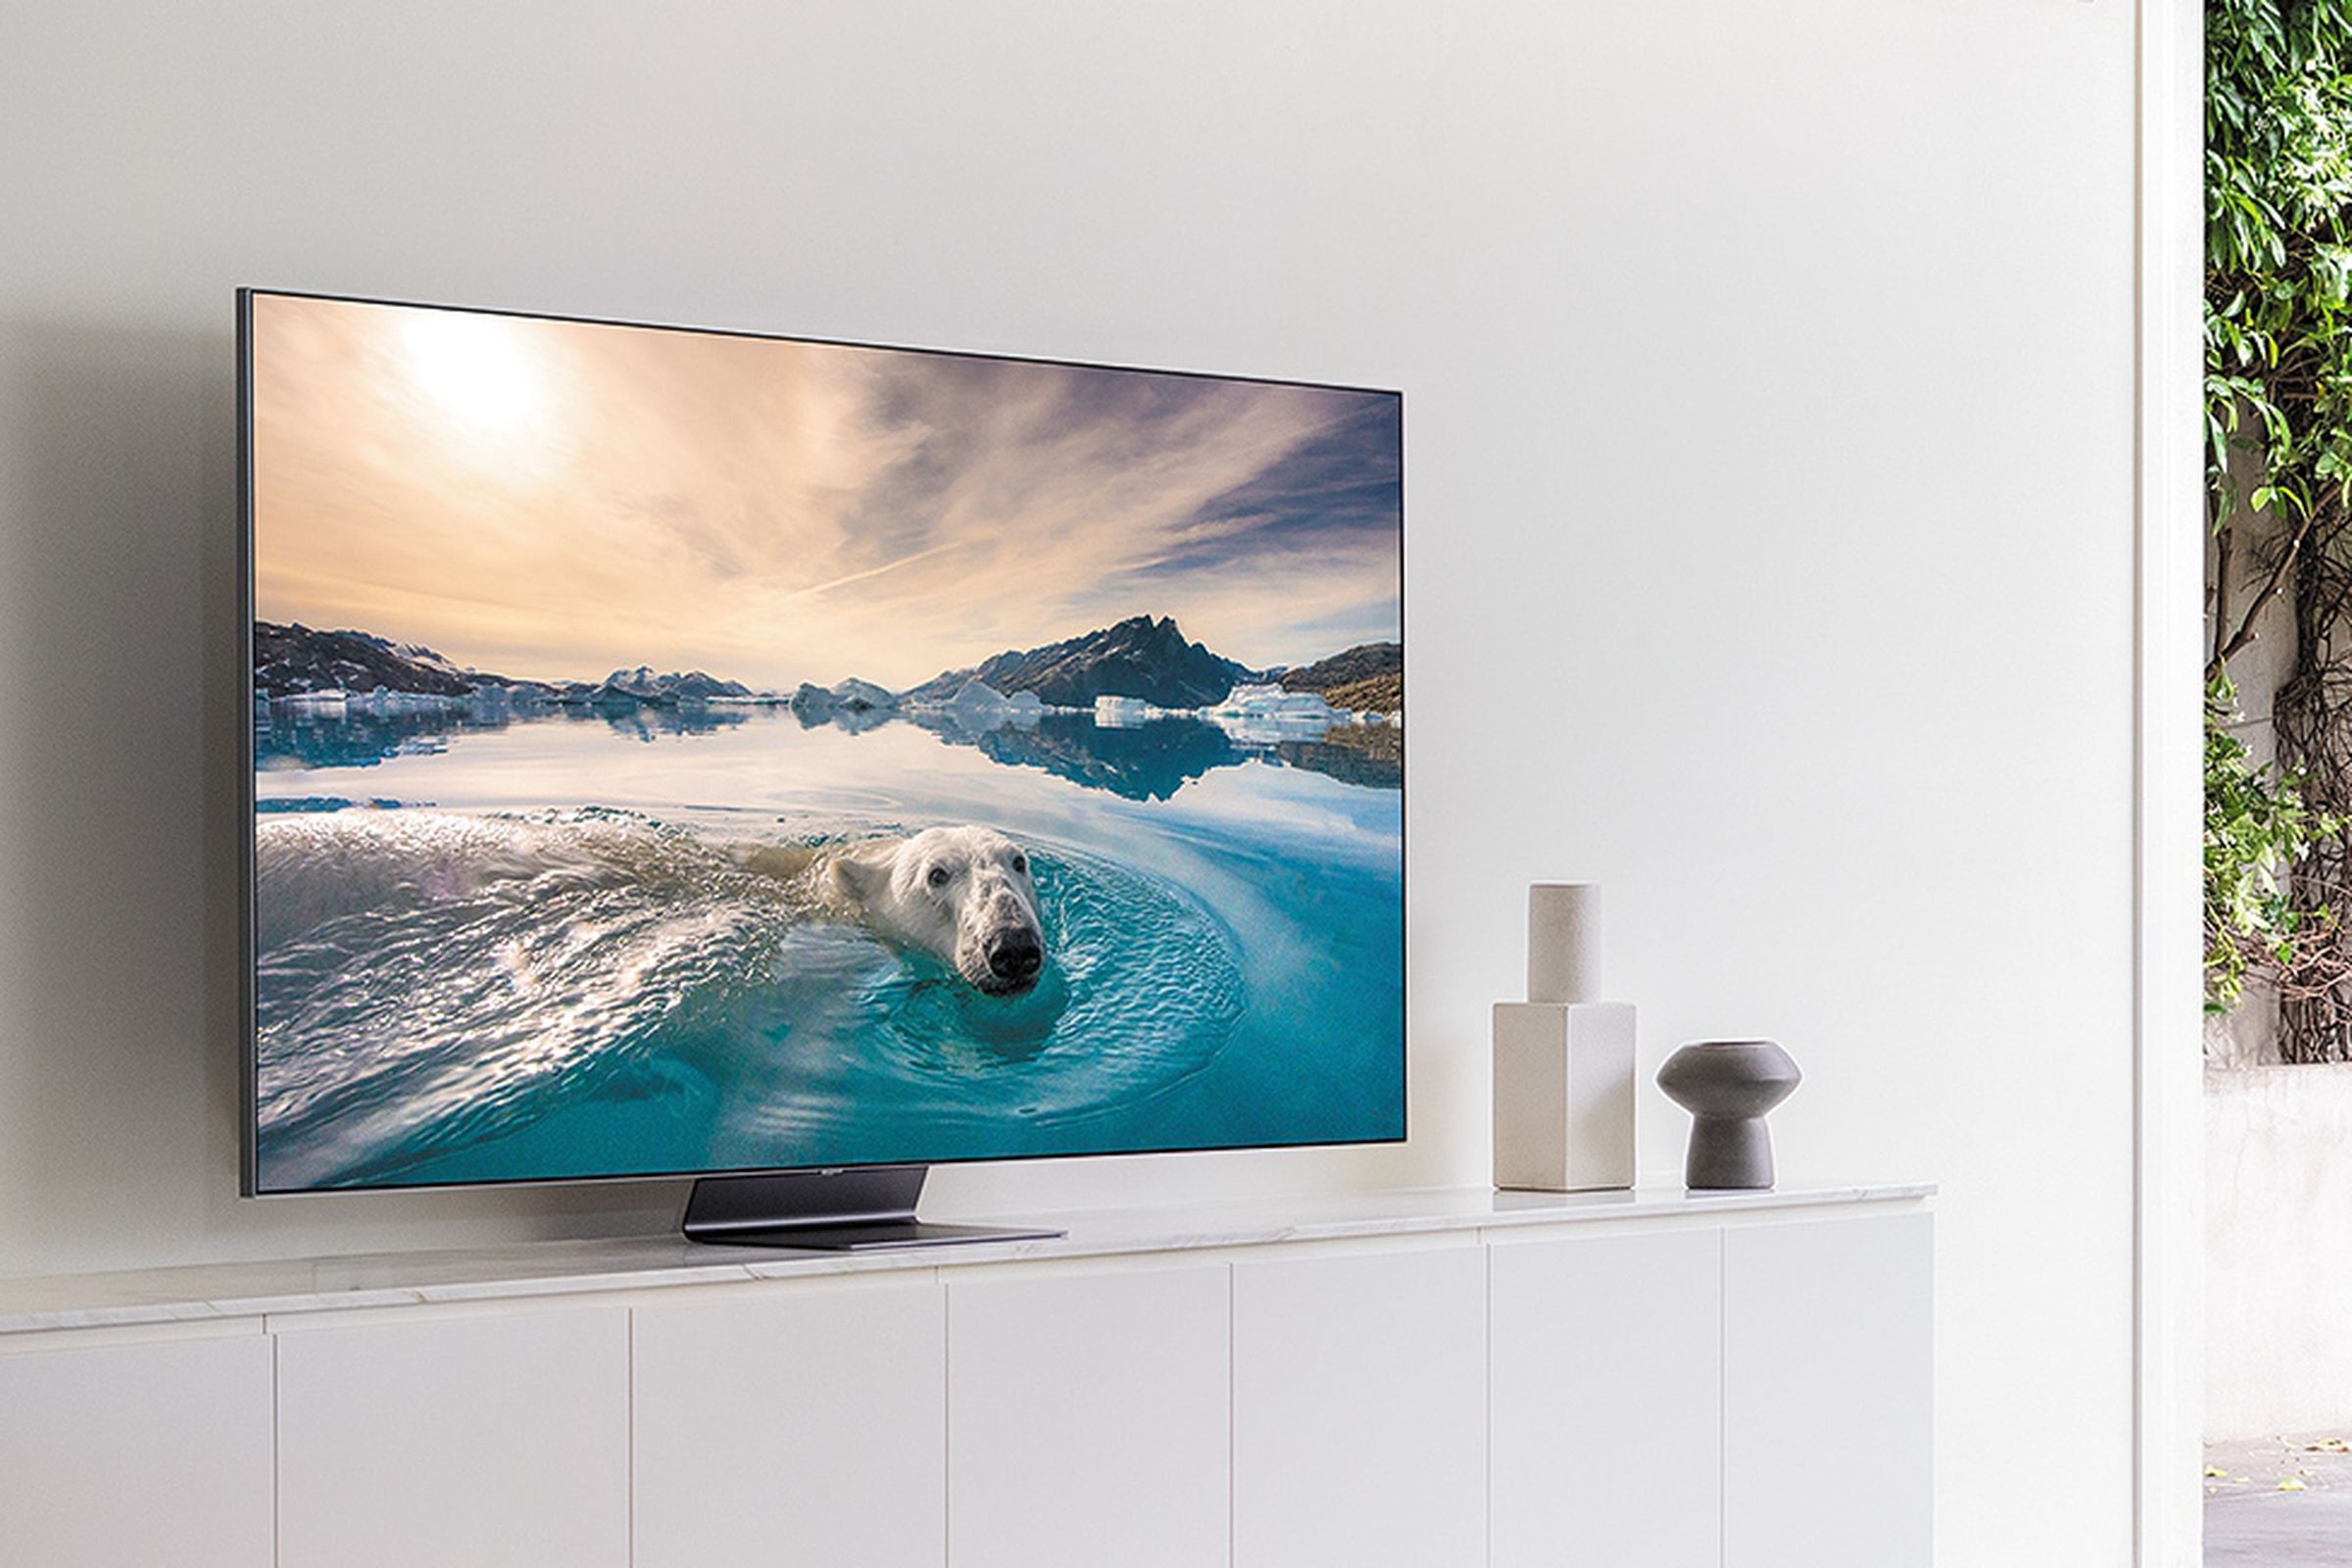 It’s unclear if Samsung’s existing TVs will be updated to support the feature.